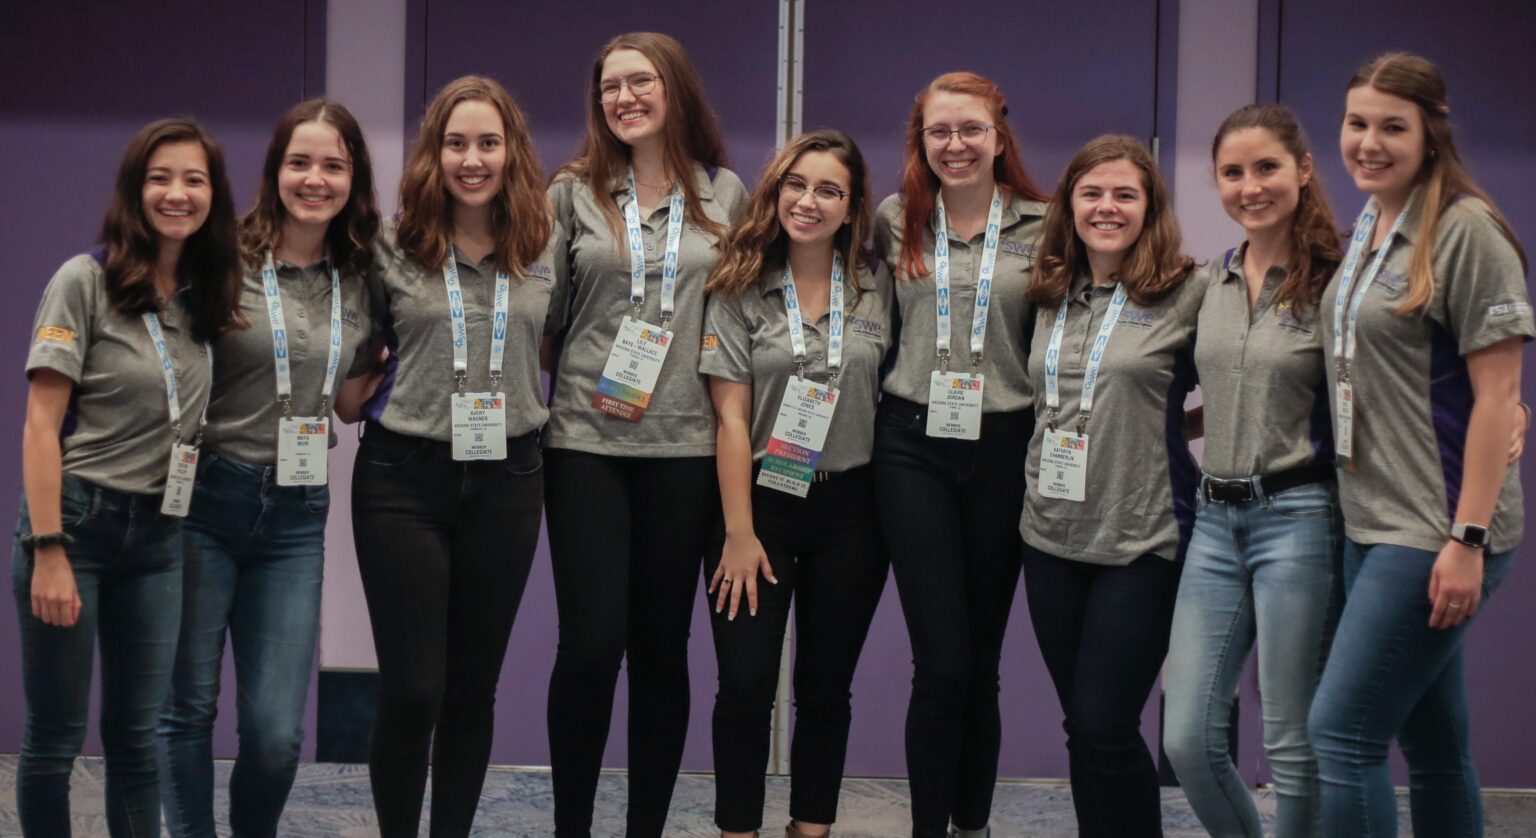 Elizabeth Jones (center) poses with ASU SWE section leadership team members at the WE19 annual Society of Women Engineers conference.